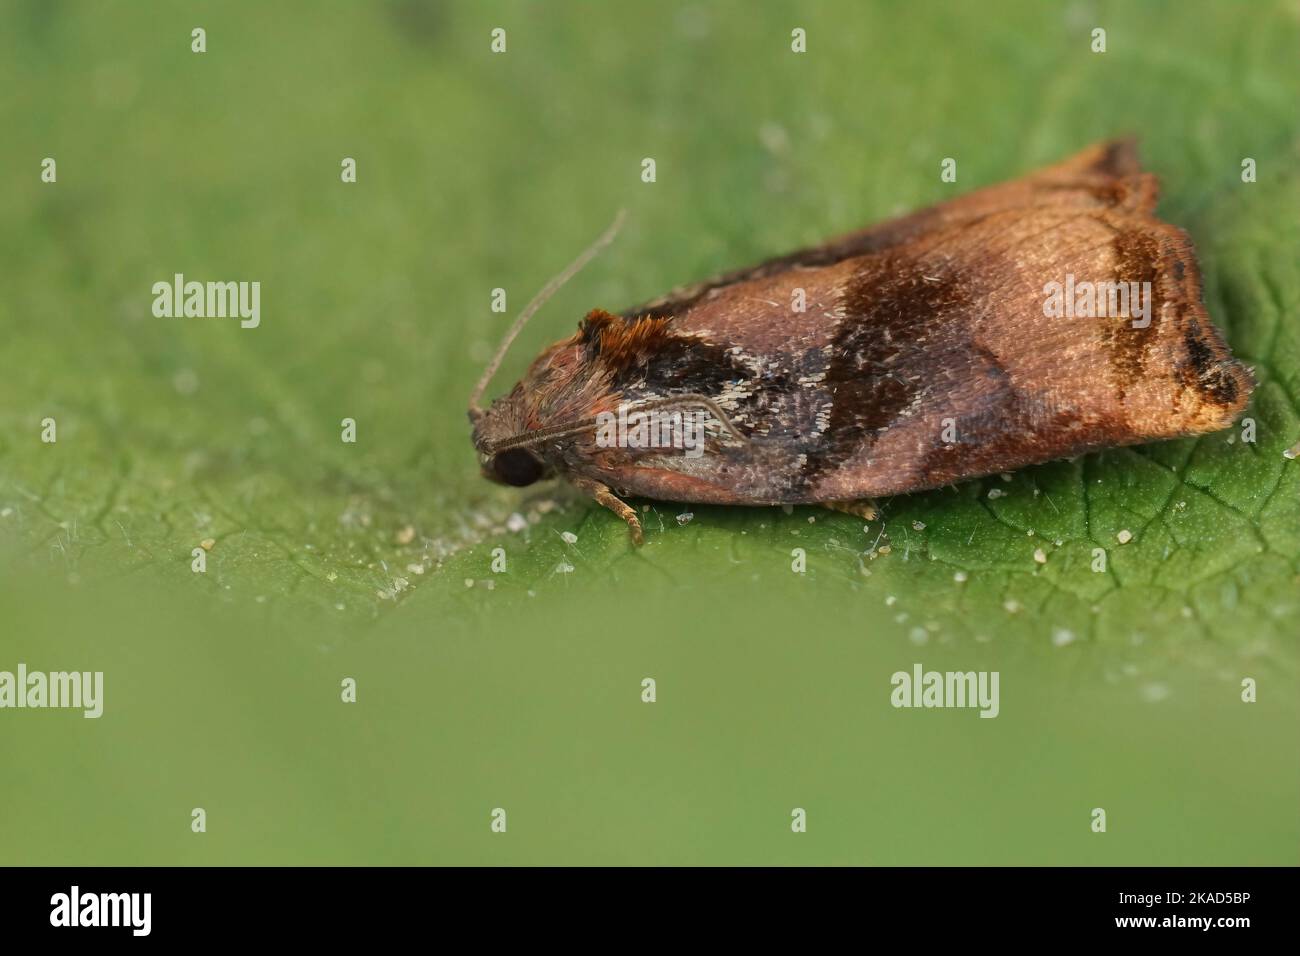 Natural closeup on the colorful Large Fruit-tree Tortrix moth, Archips podana sitting on a green leaf Stock Photo